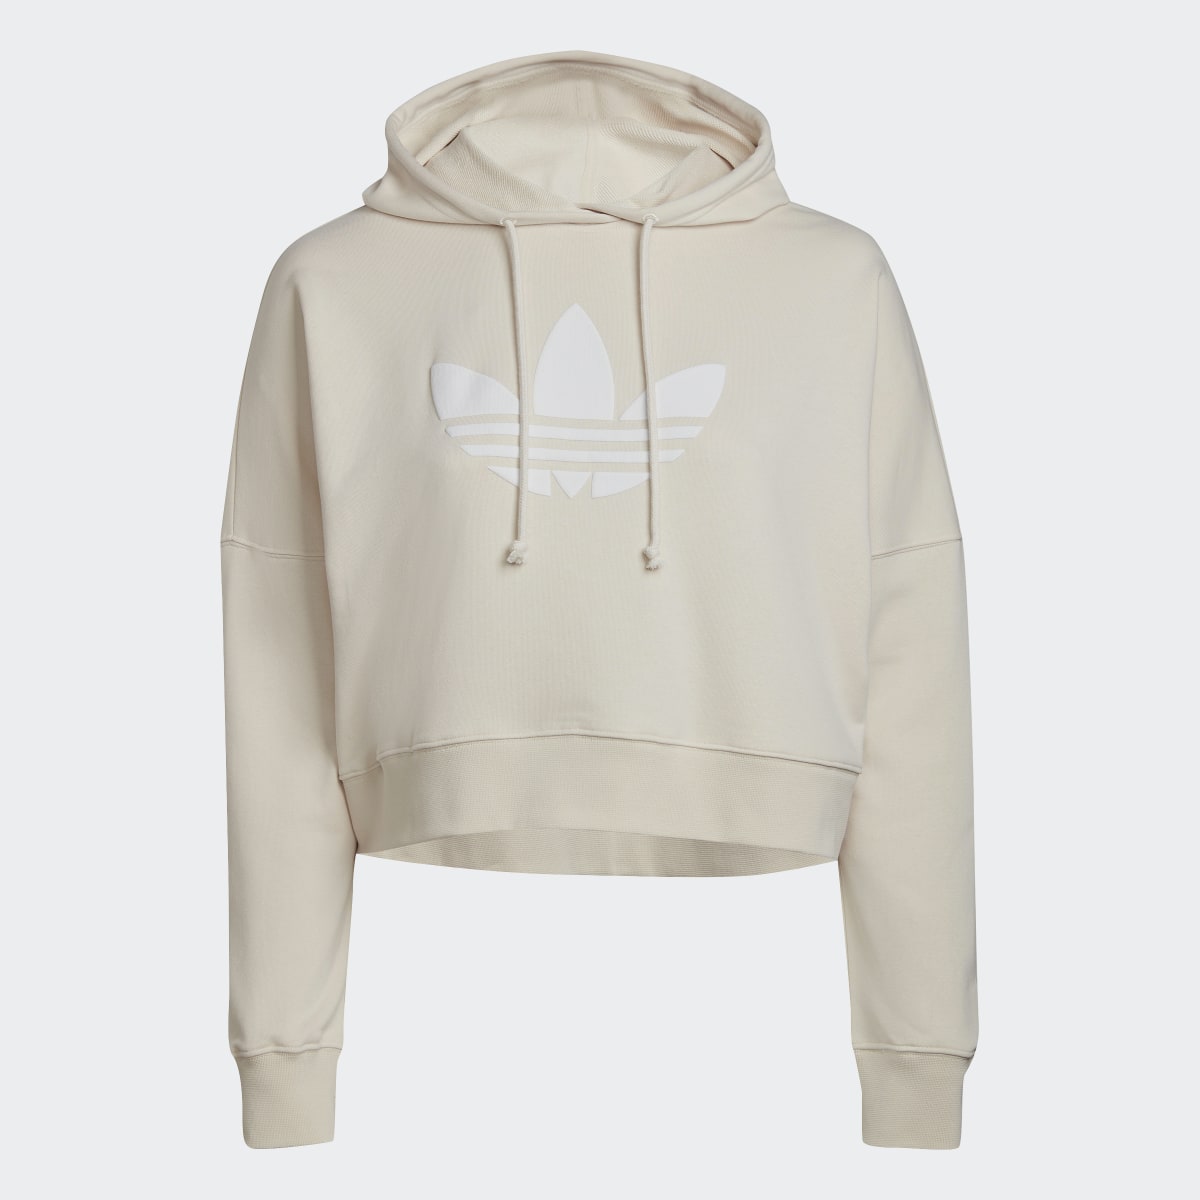 Adidas Cropped Hoodie (Plus Size). 5